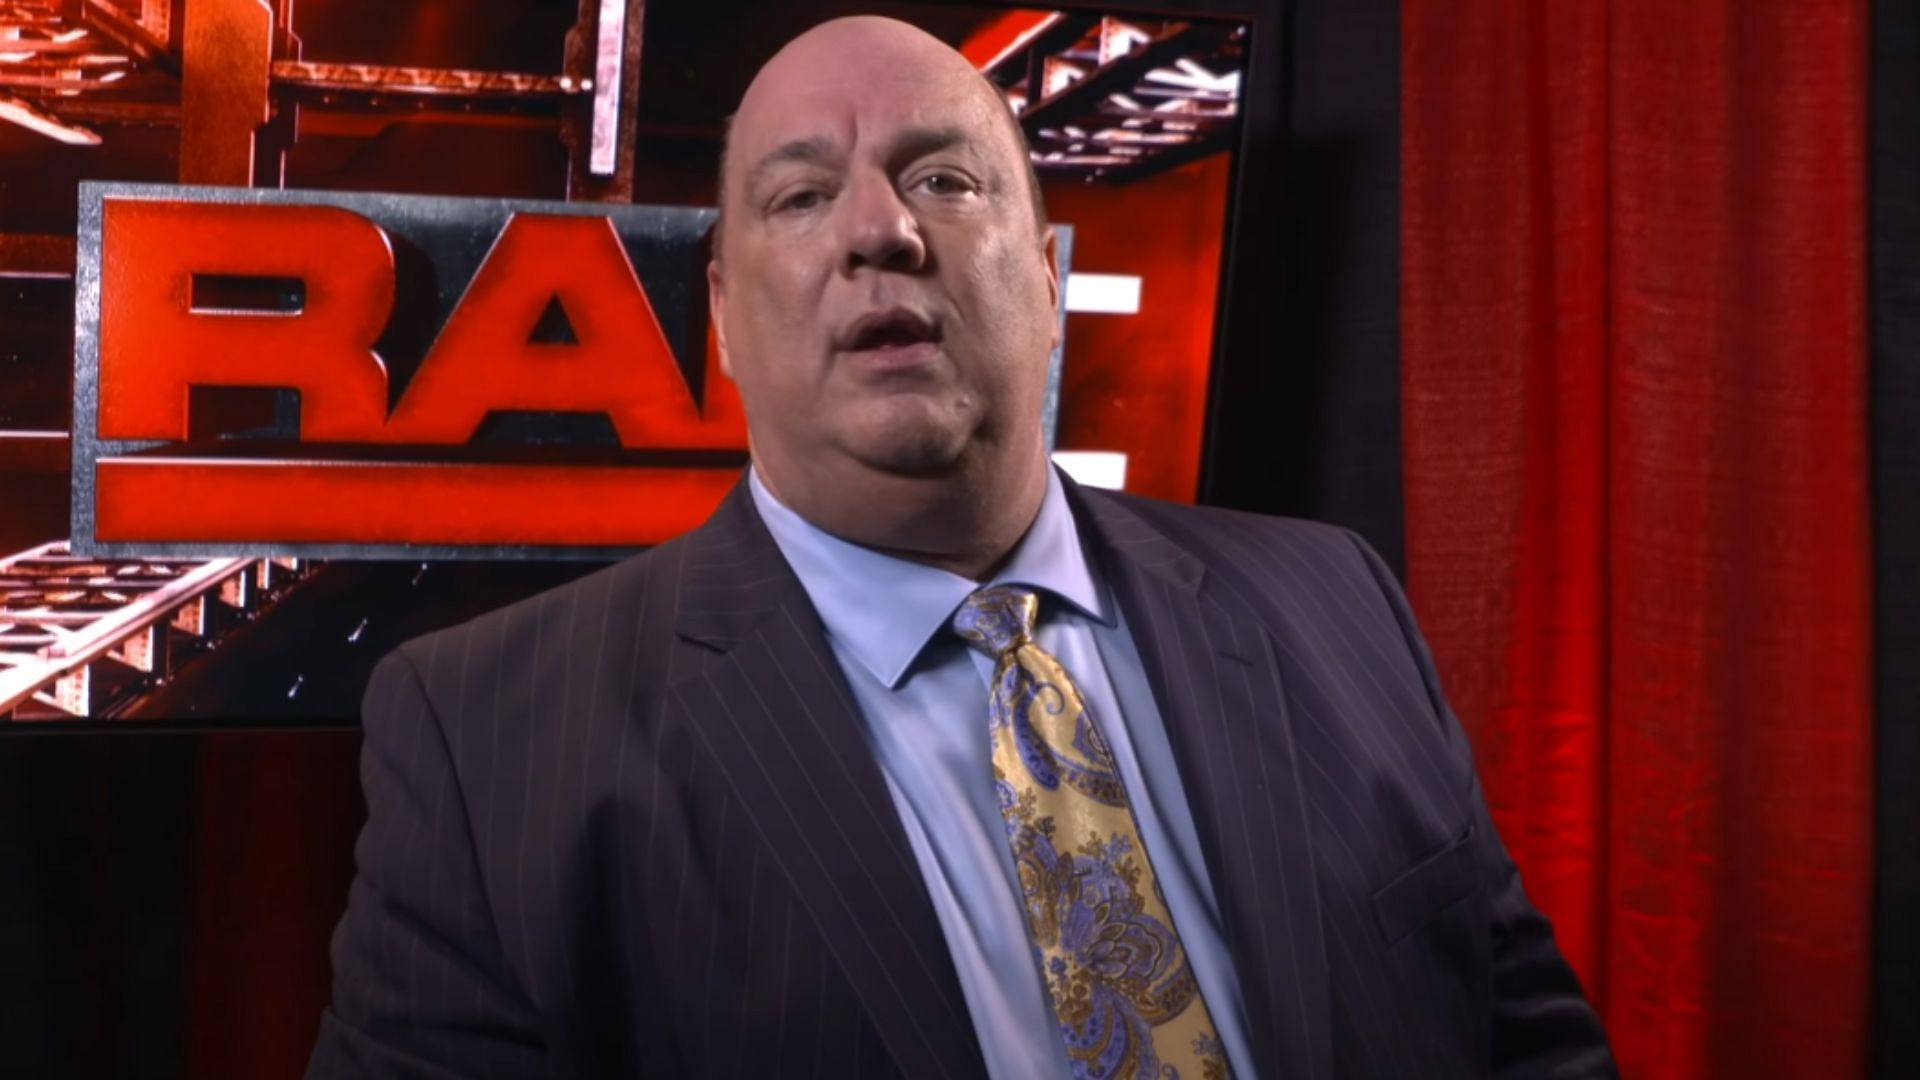 Former SmackDown lead writer and current on-screen talent Paul Heyman